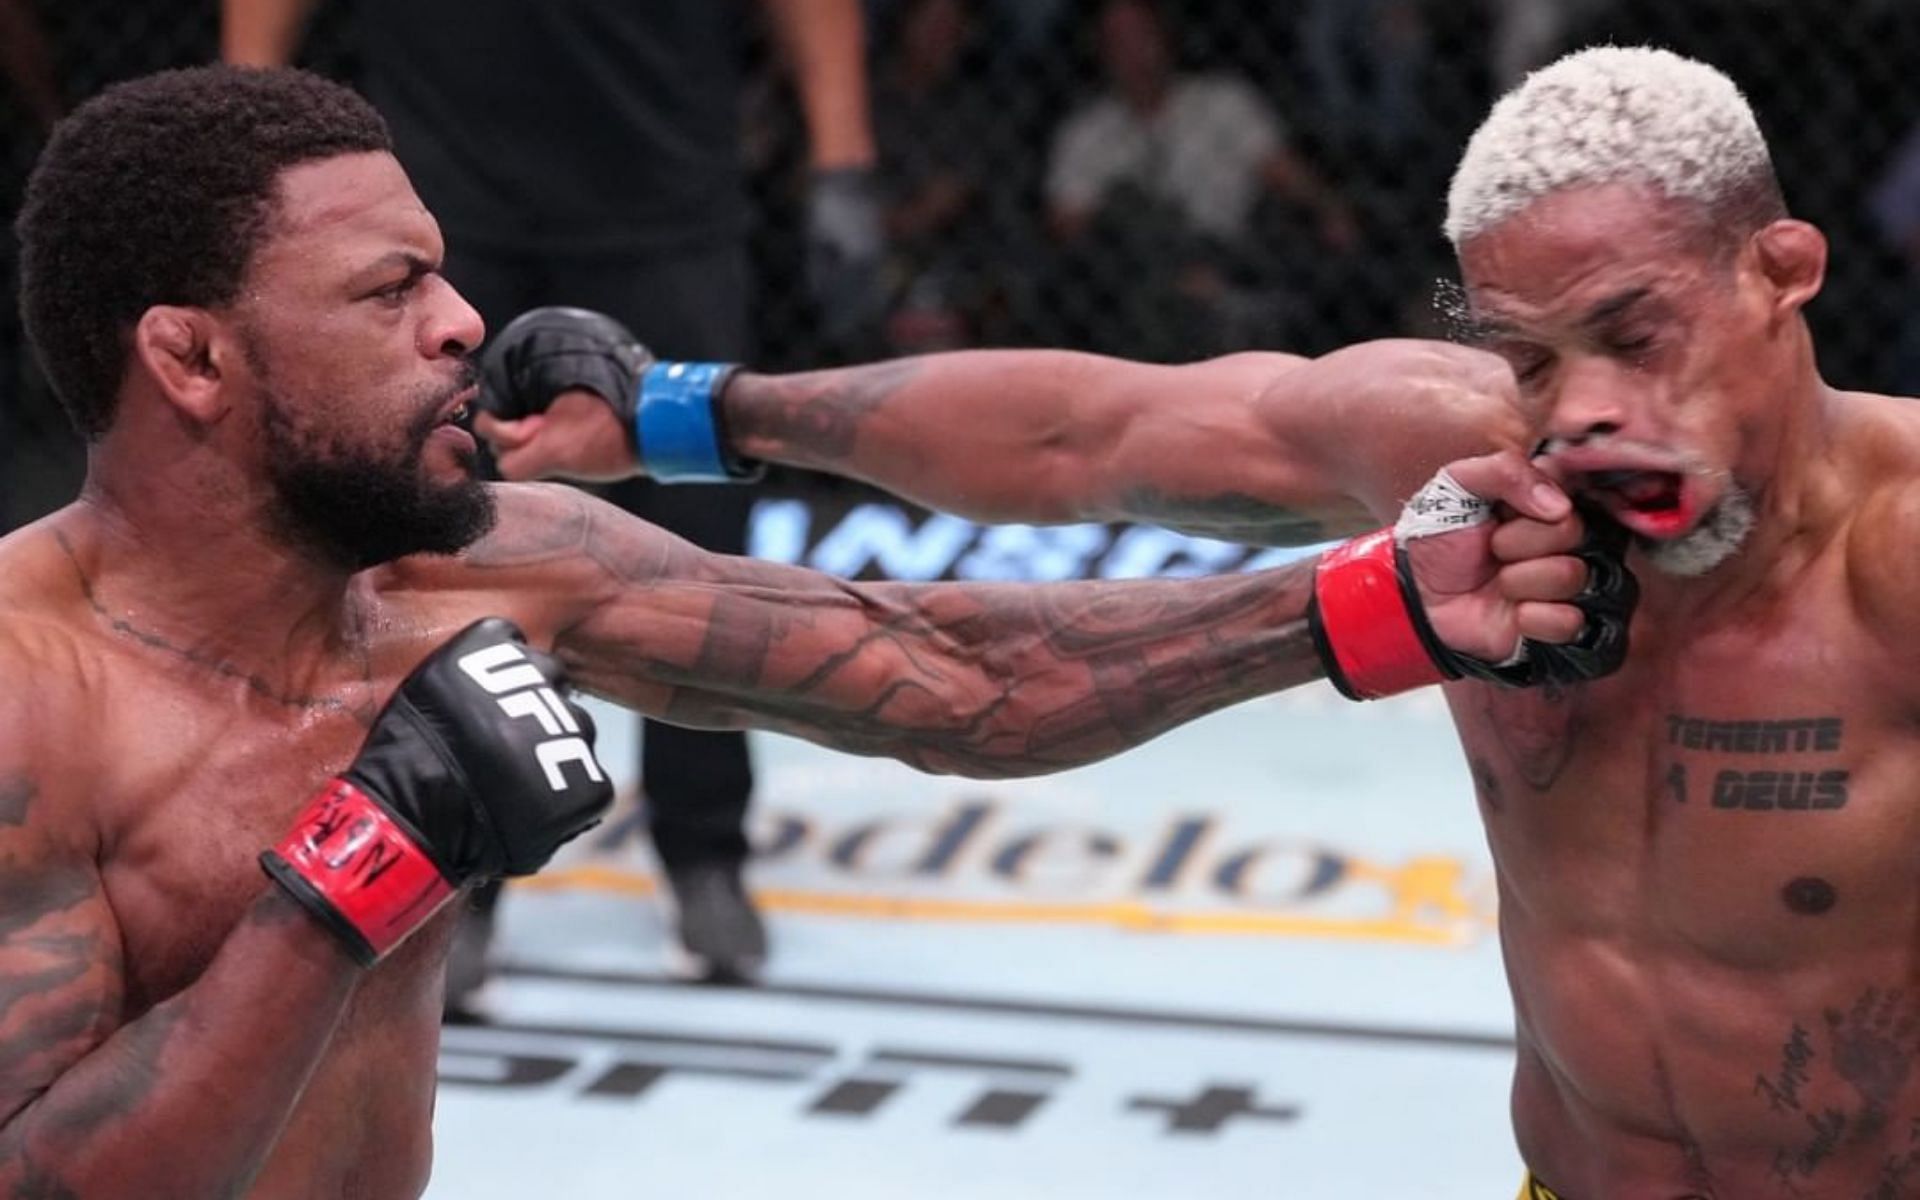 Michael Johnson with one of his most impressive highlight knockouts (Photo from @UFC via Instagram)